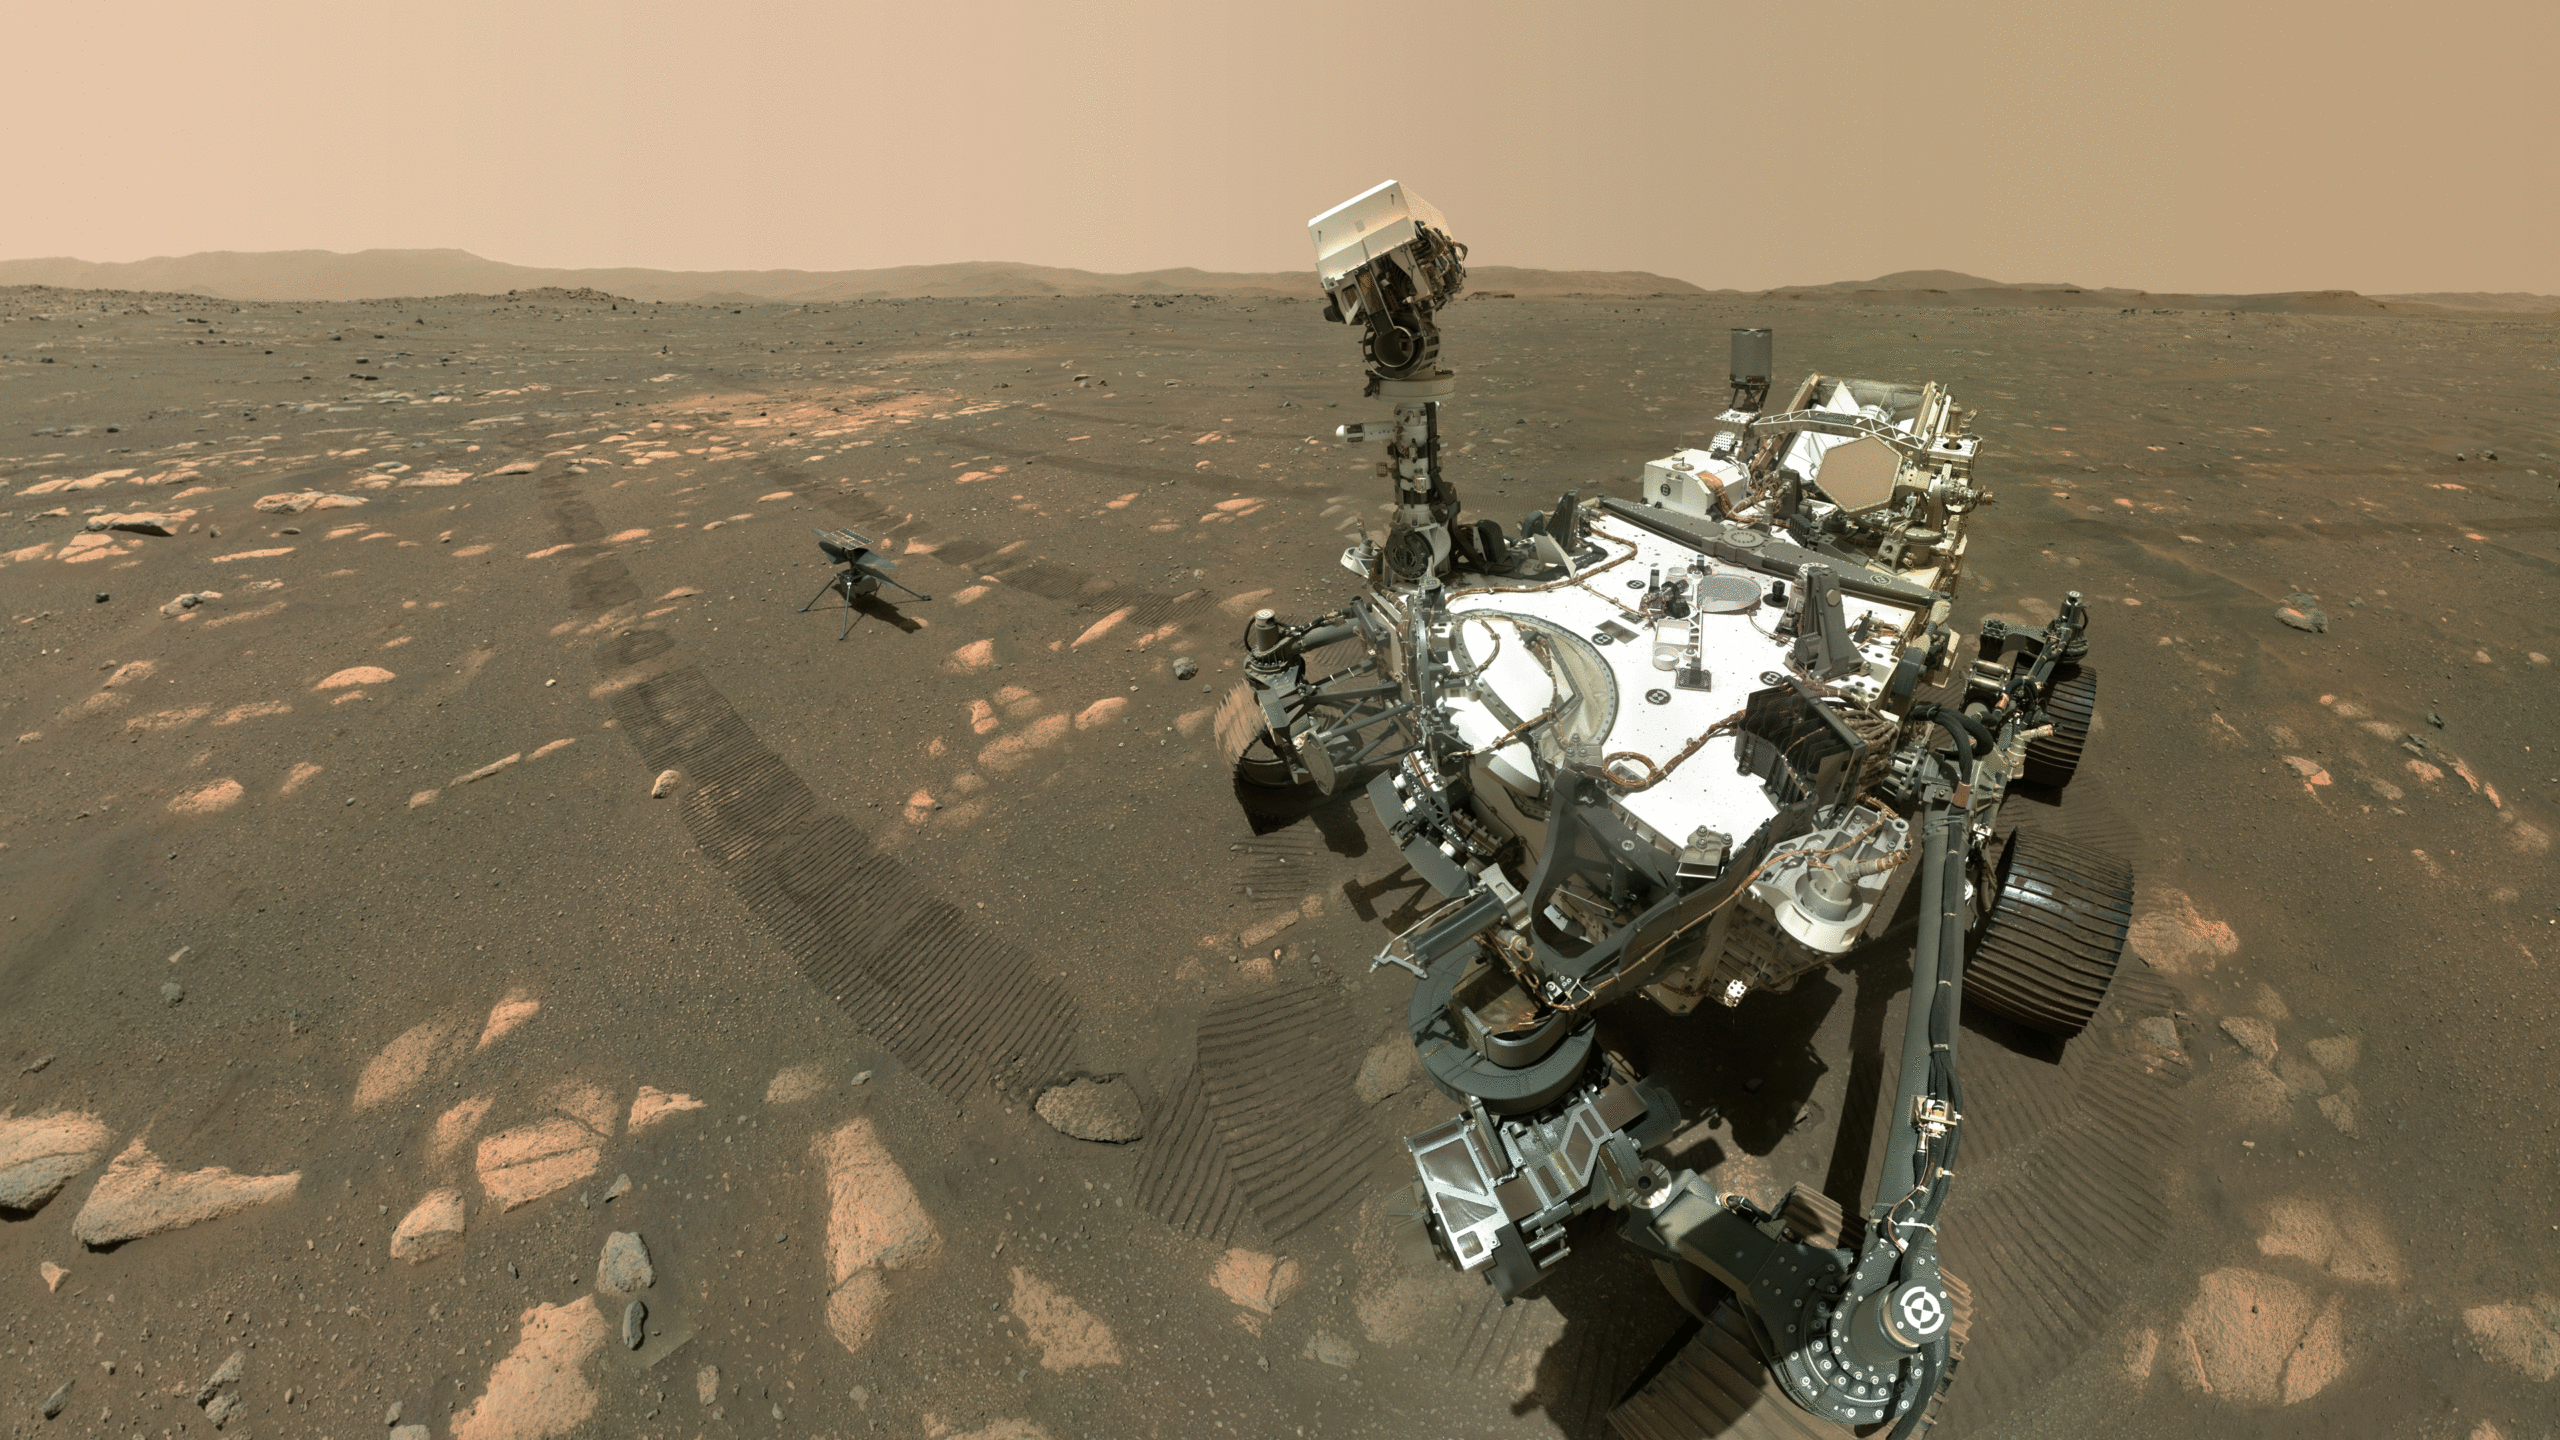 Perseverance and Ingenuity together on the surface of Mars on April 6, 2021. (Gif: NASA/JPL-Caltech/MSSS)